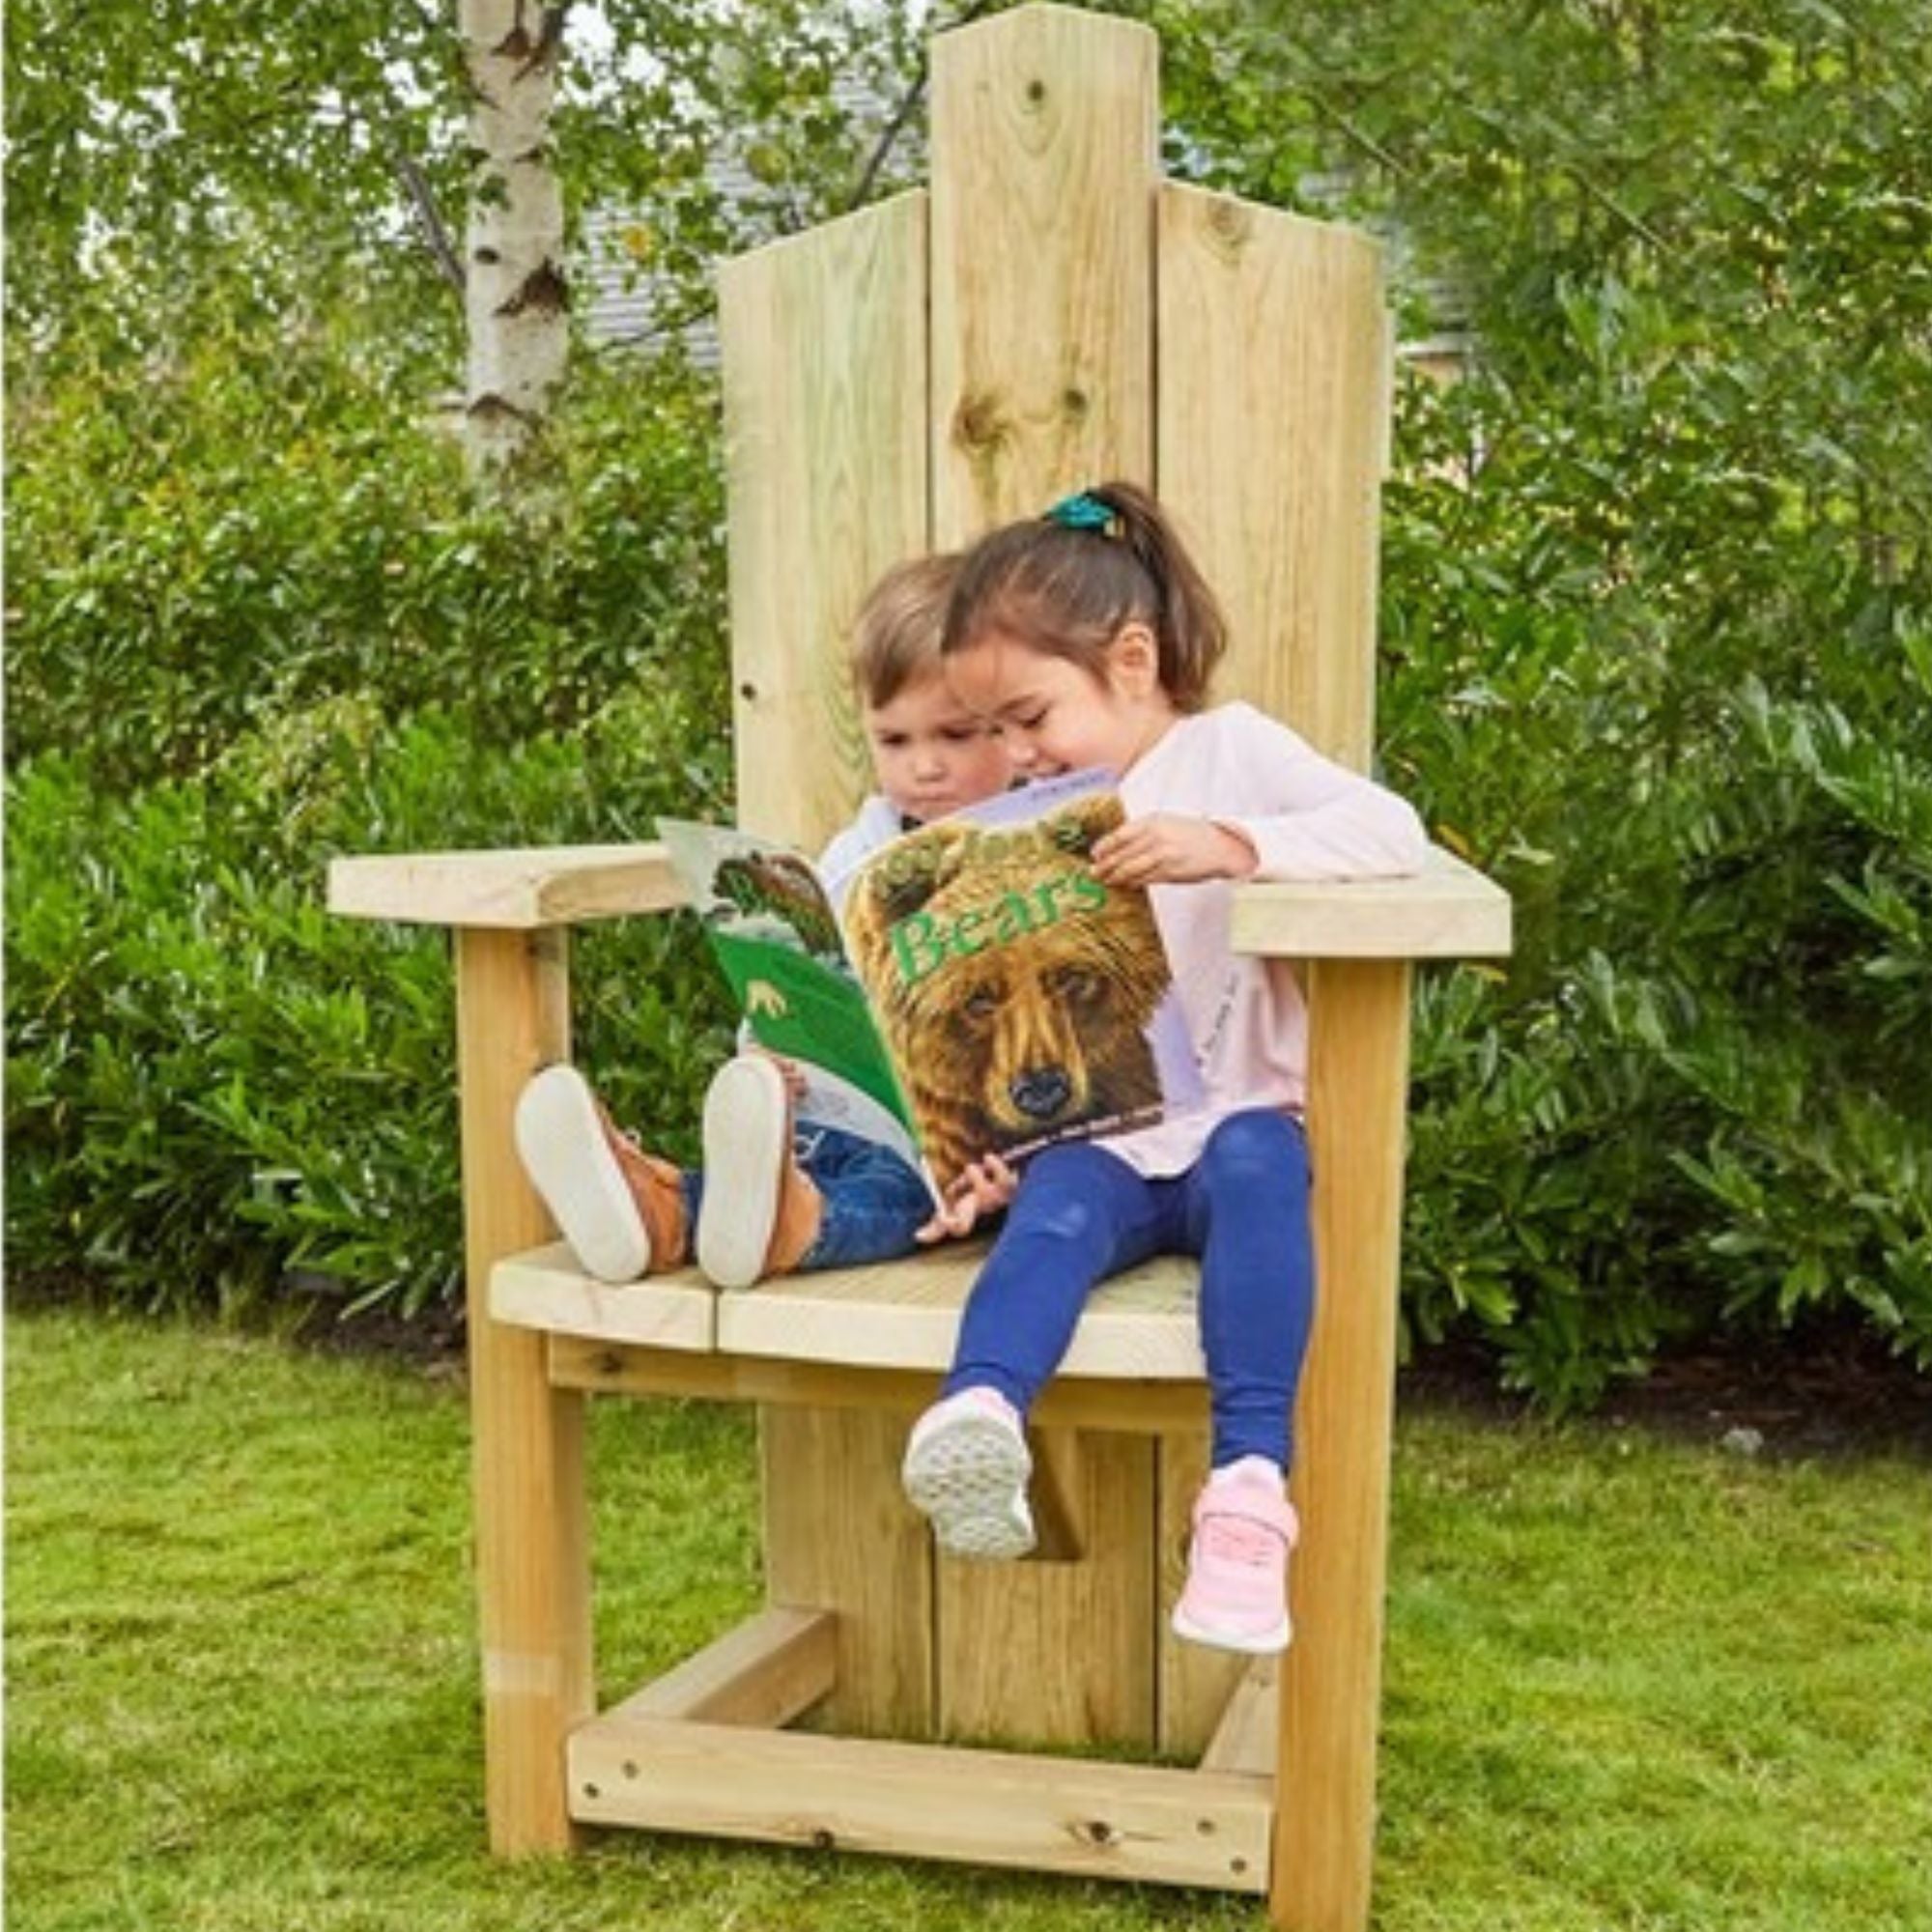 Freestanding Wooden Storytellers Throne, This beautiful chunky Storytellers Throne will make any child feel like royalty! The Storytellers Throne is designed to capture a child's imagination and spark creativity, this chair is great for outdoor storytelling and role play. Large enough to seat two children together, it will help to develop collaborative social reading skills.The Storytellers Throne can also be used to bring a touch of magic during role play for potential Kings and Queens. Designed to capture